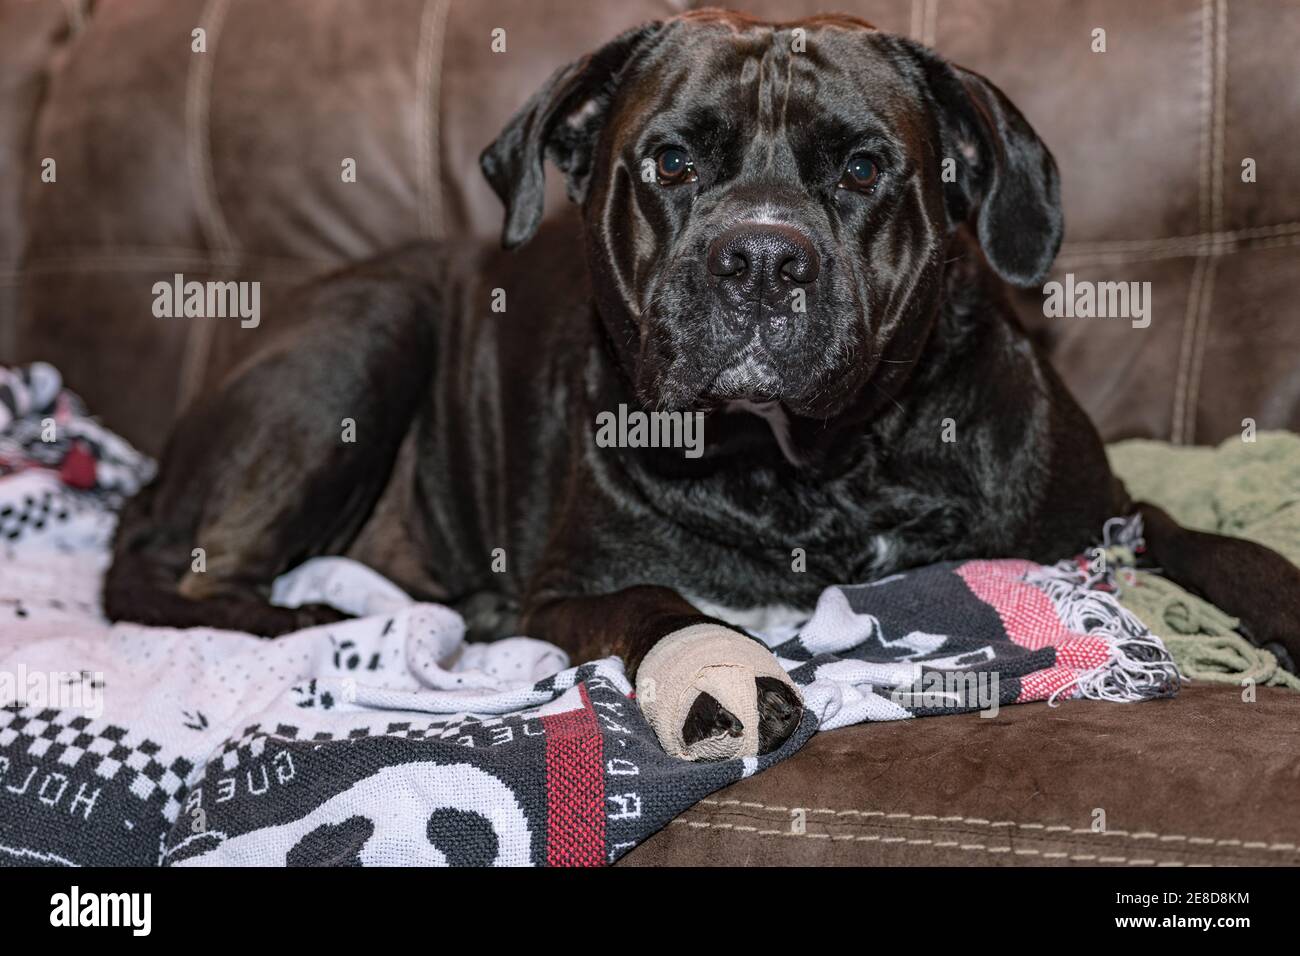 Large black dog with a bandage on his foot lying on a brown couch on blankets Stock Photo